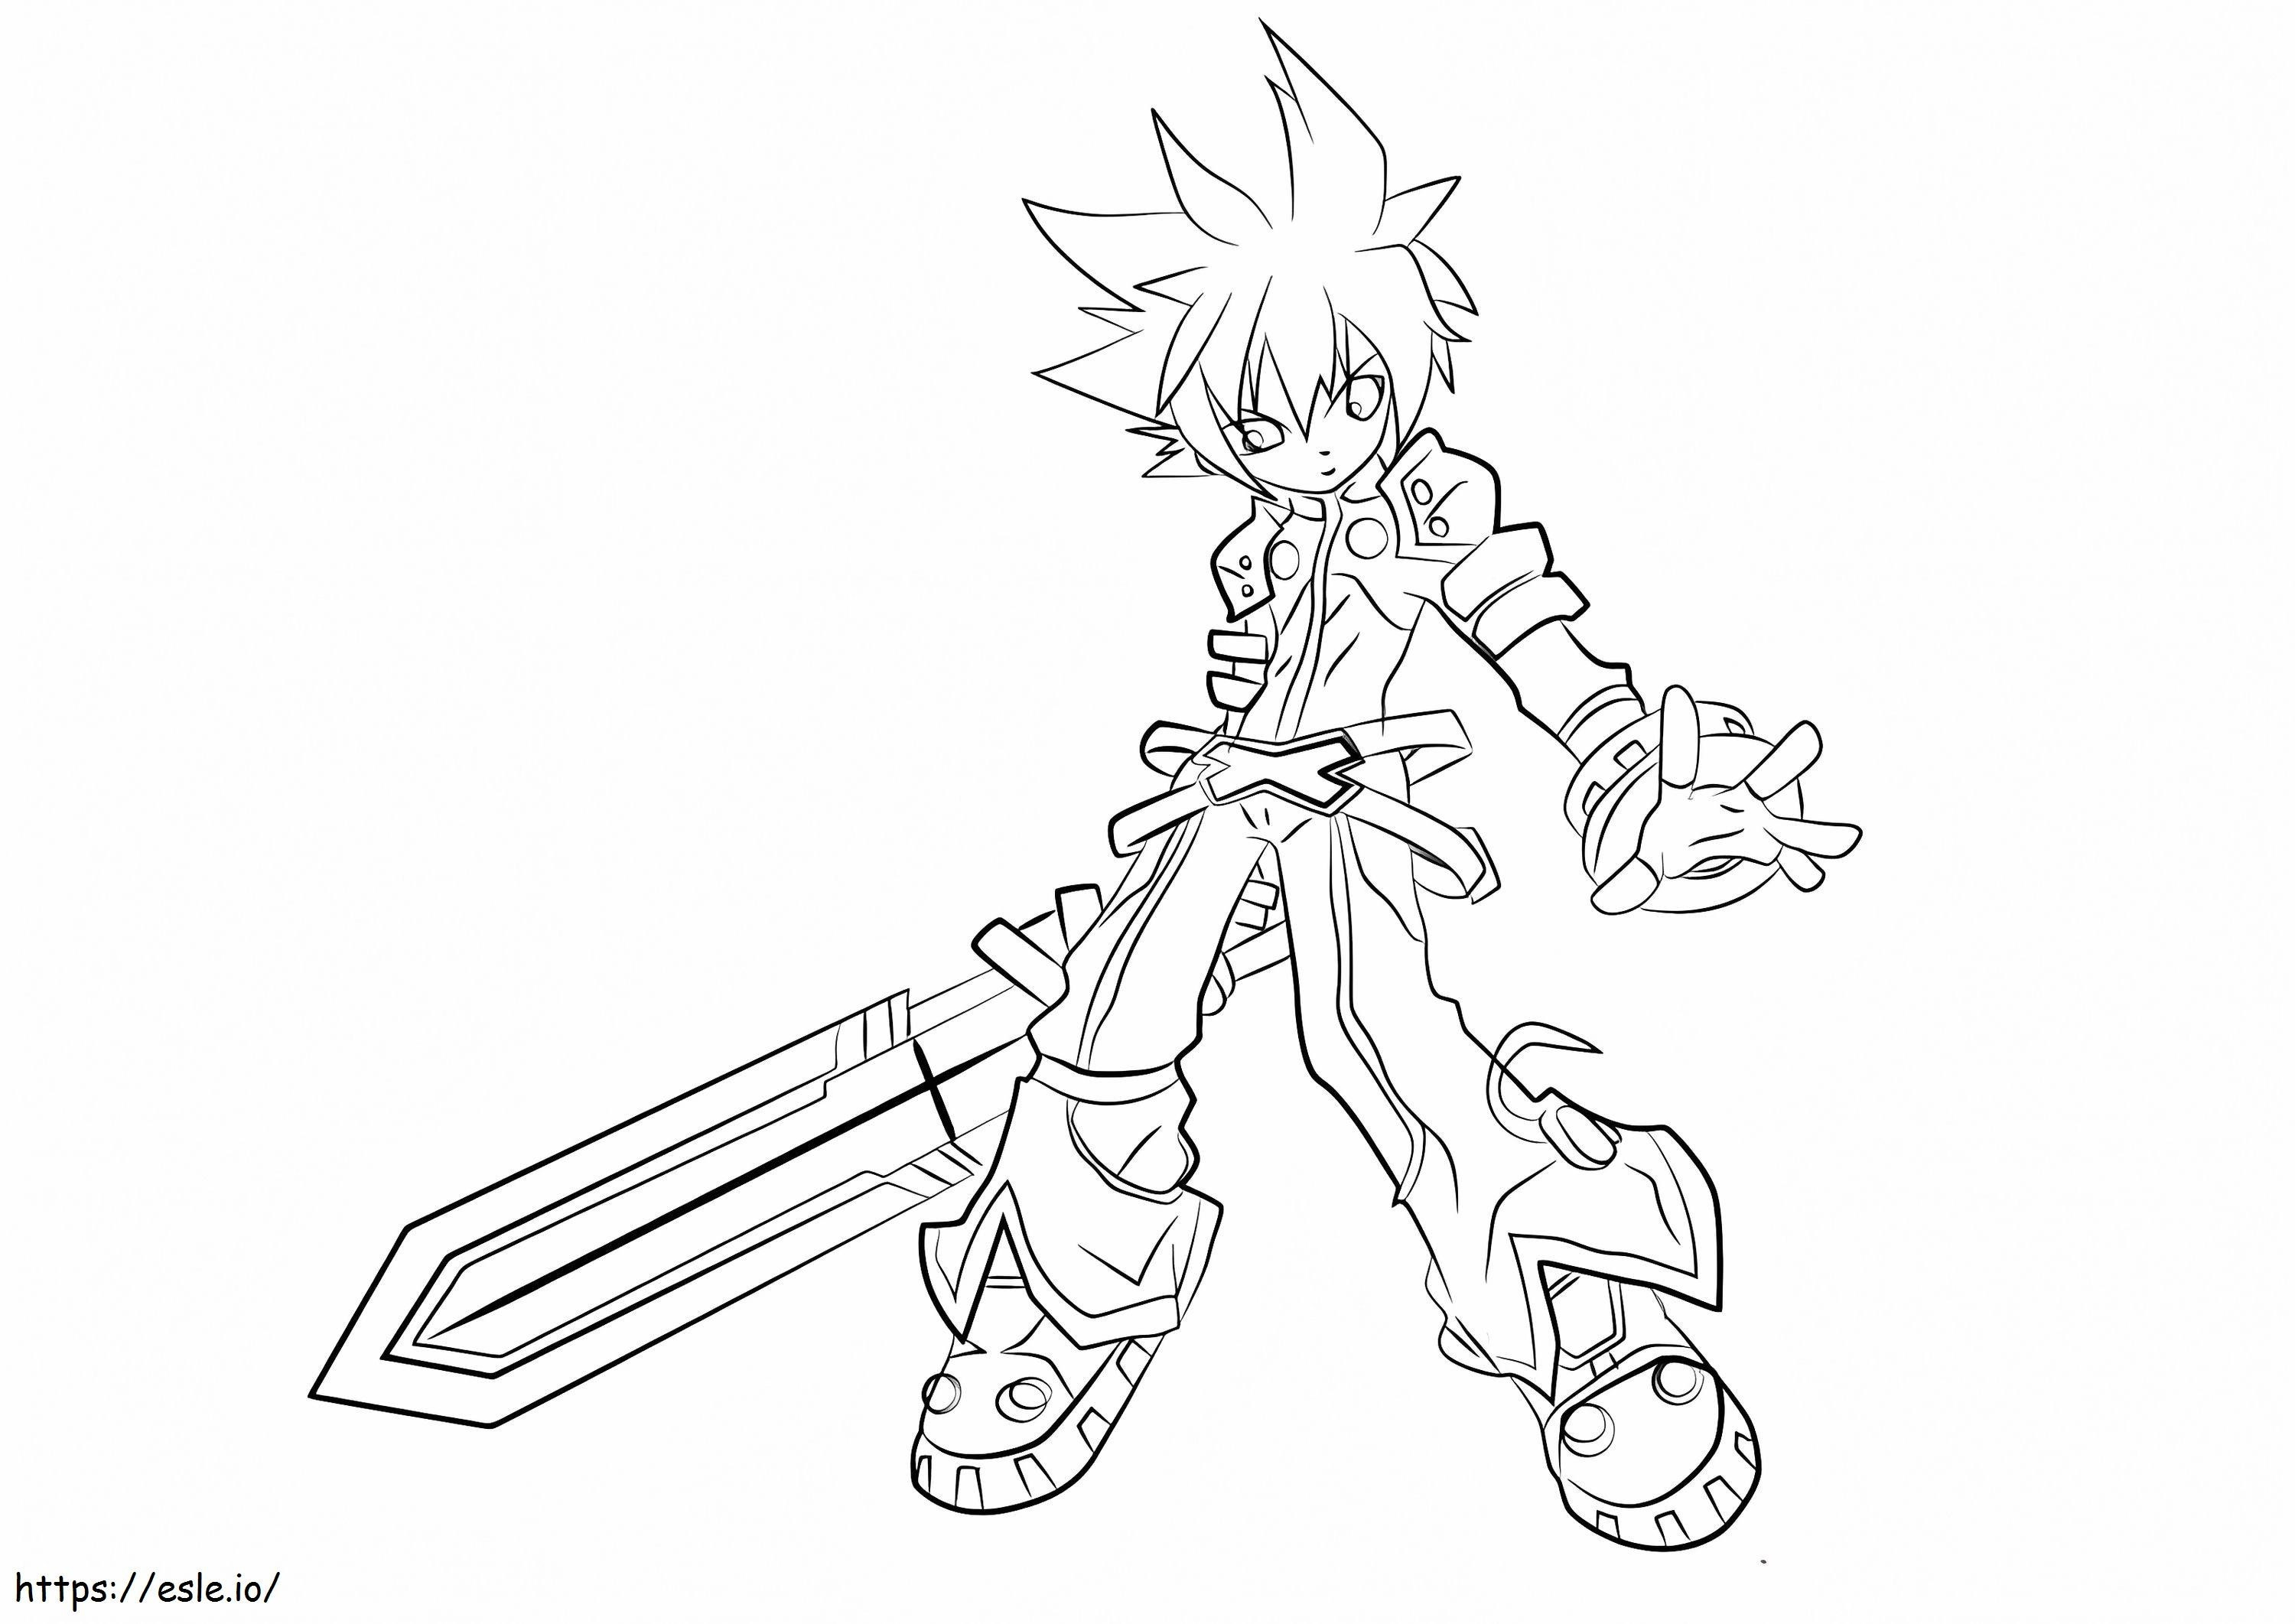 Lord Knight From Elsword coloring page